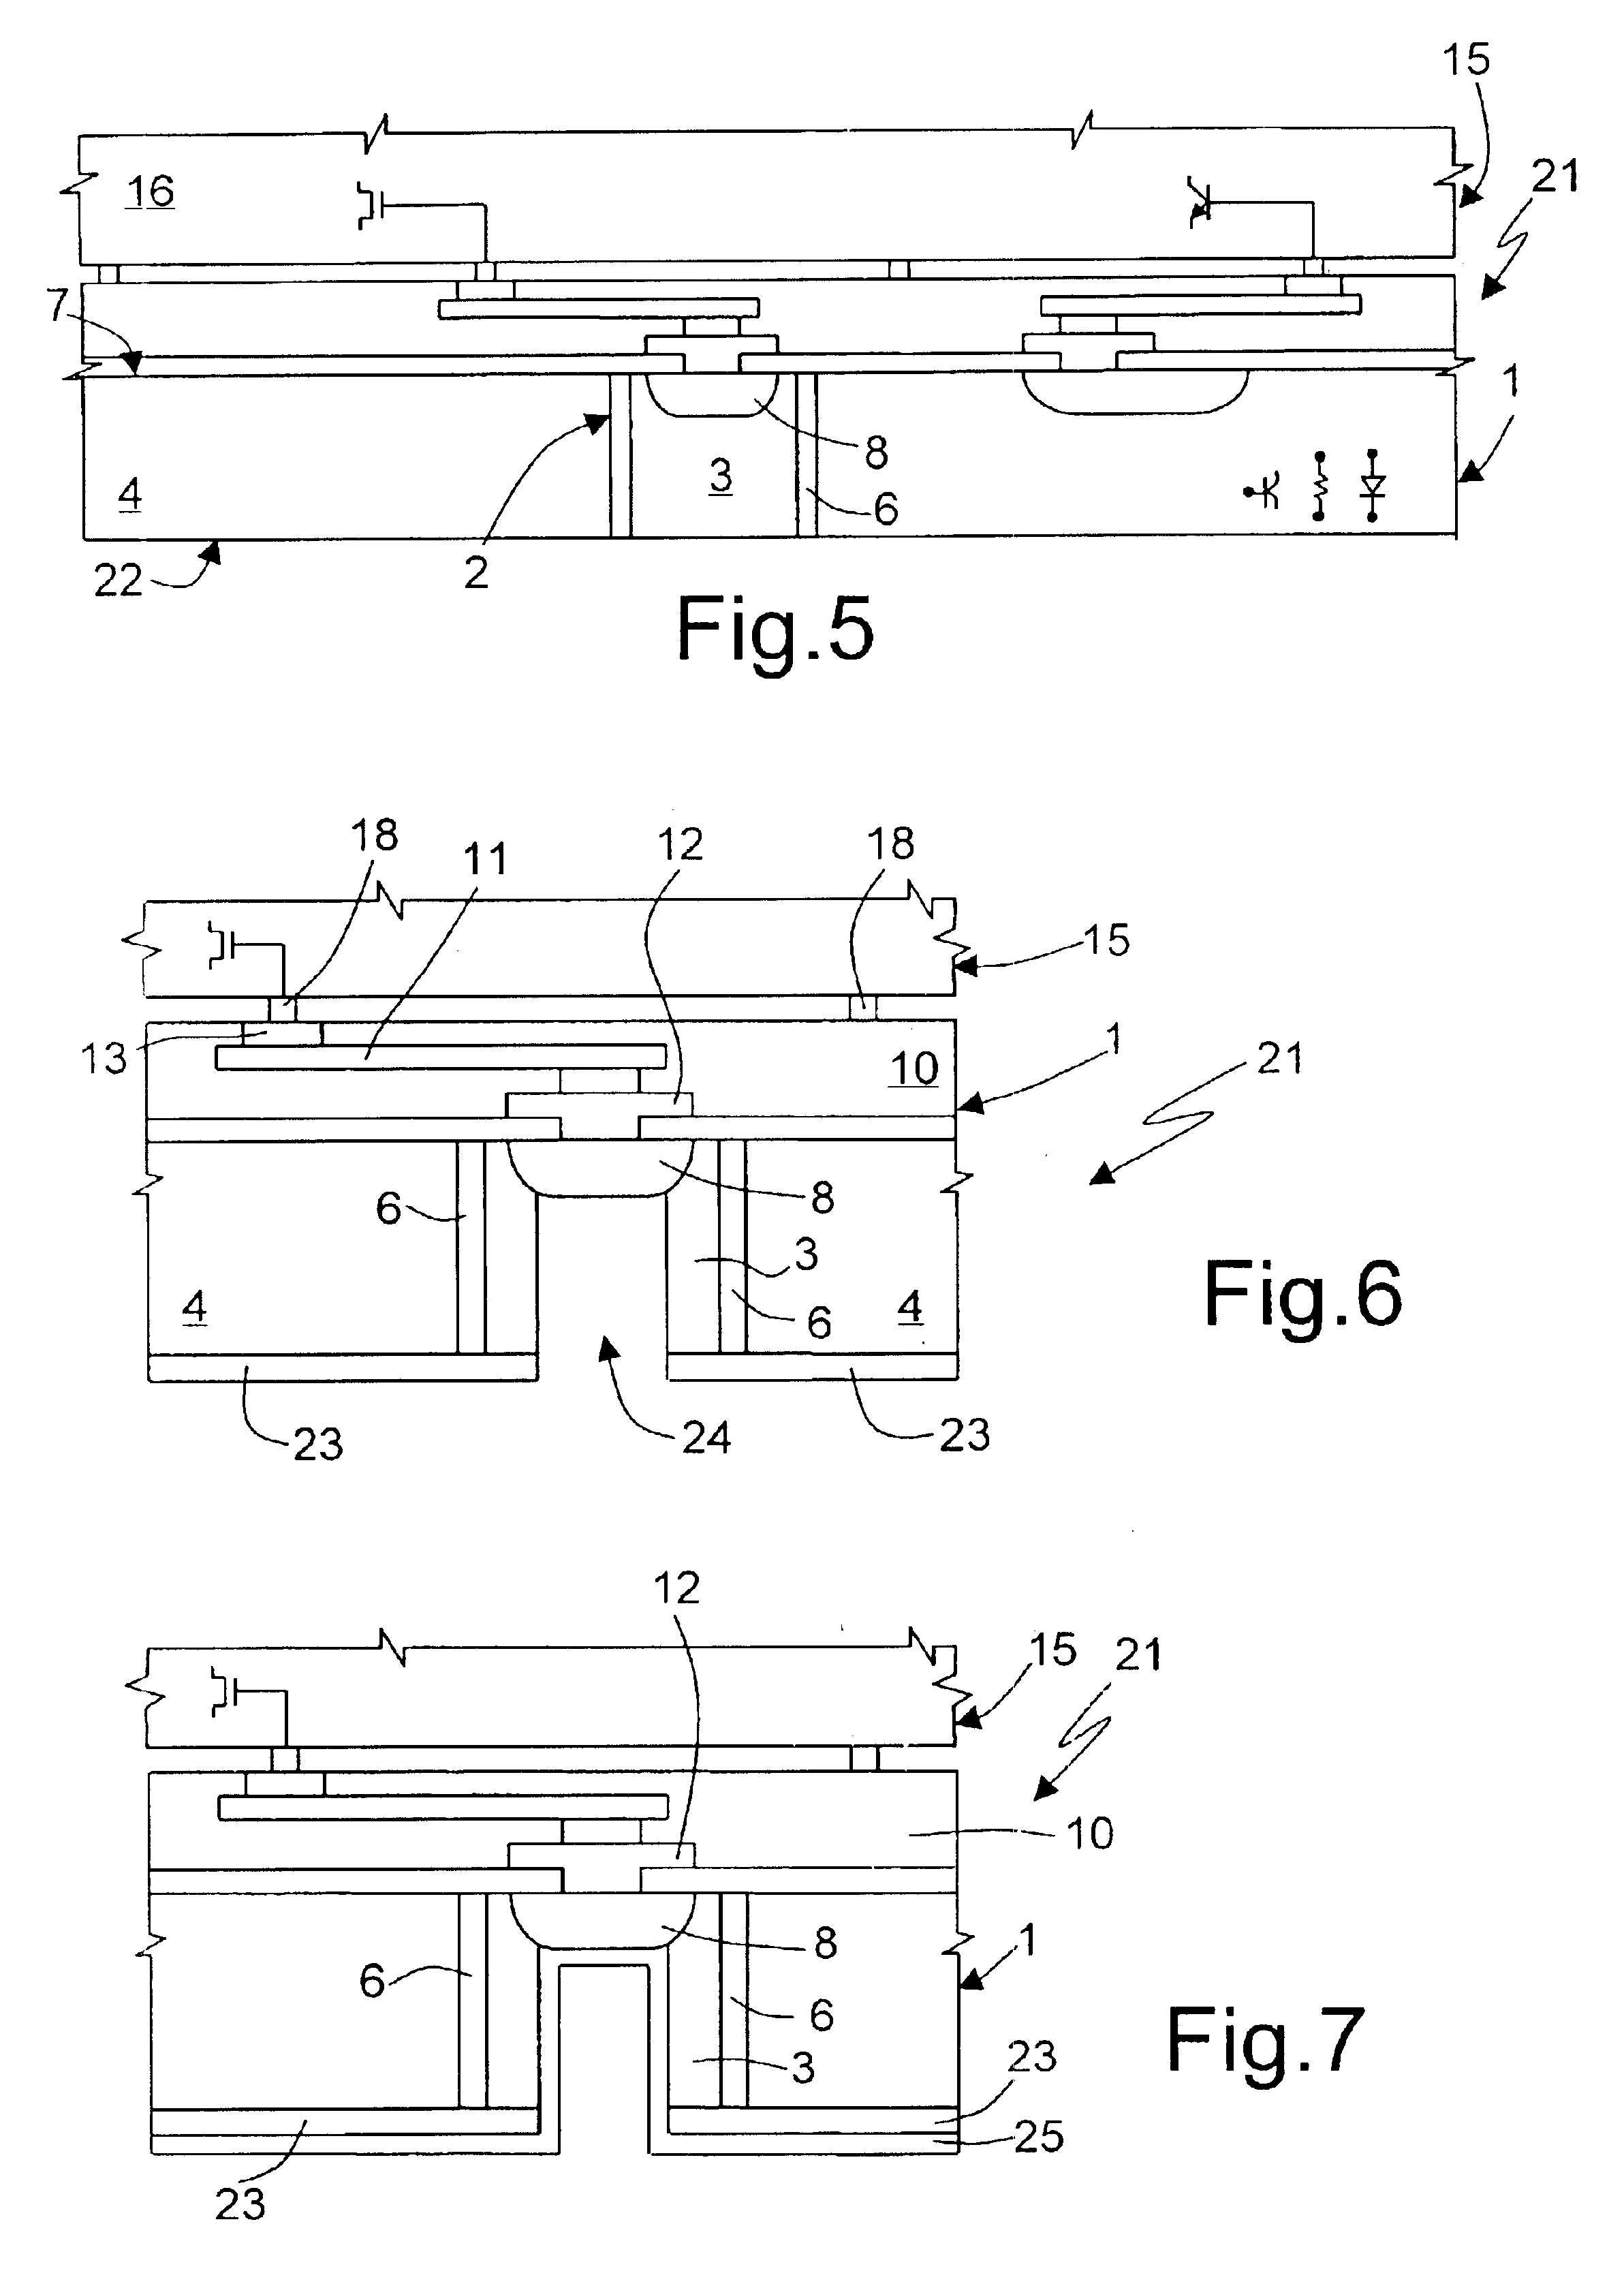 Process for manufacturing a through insulated interconnection in a body of semiconductor material